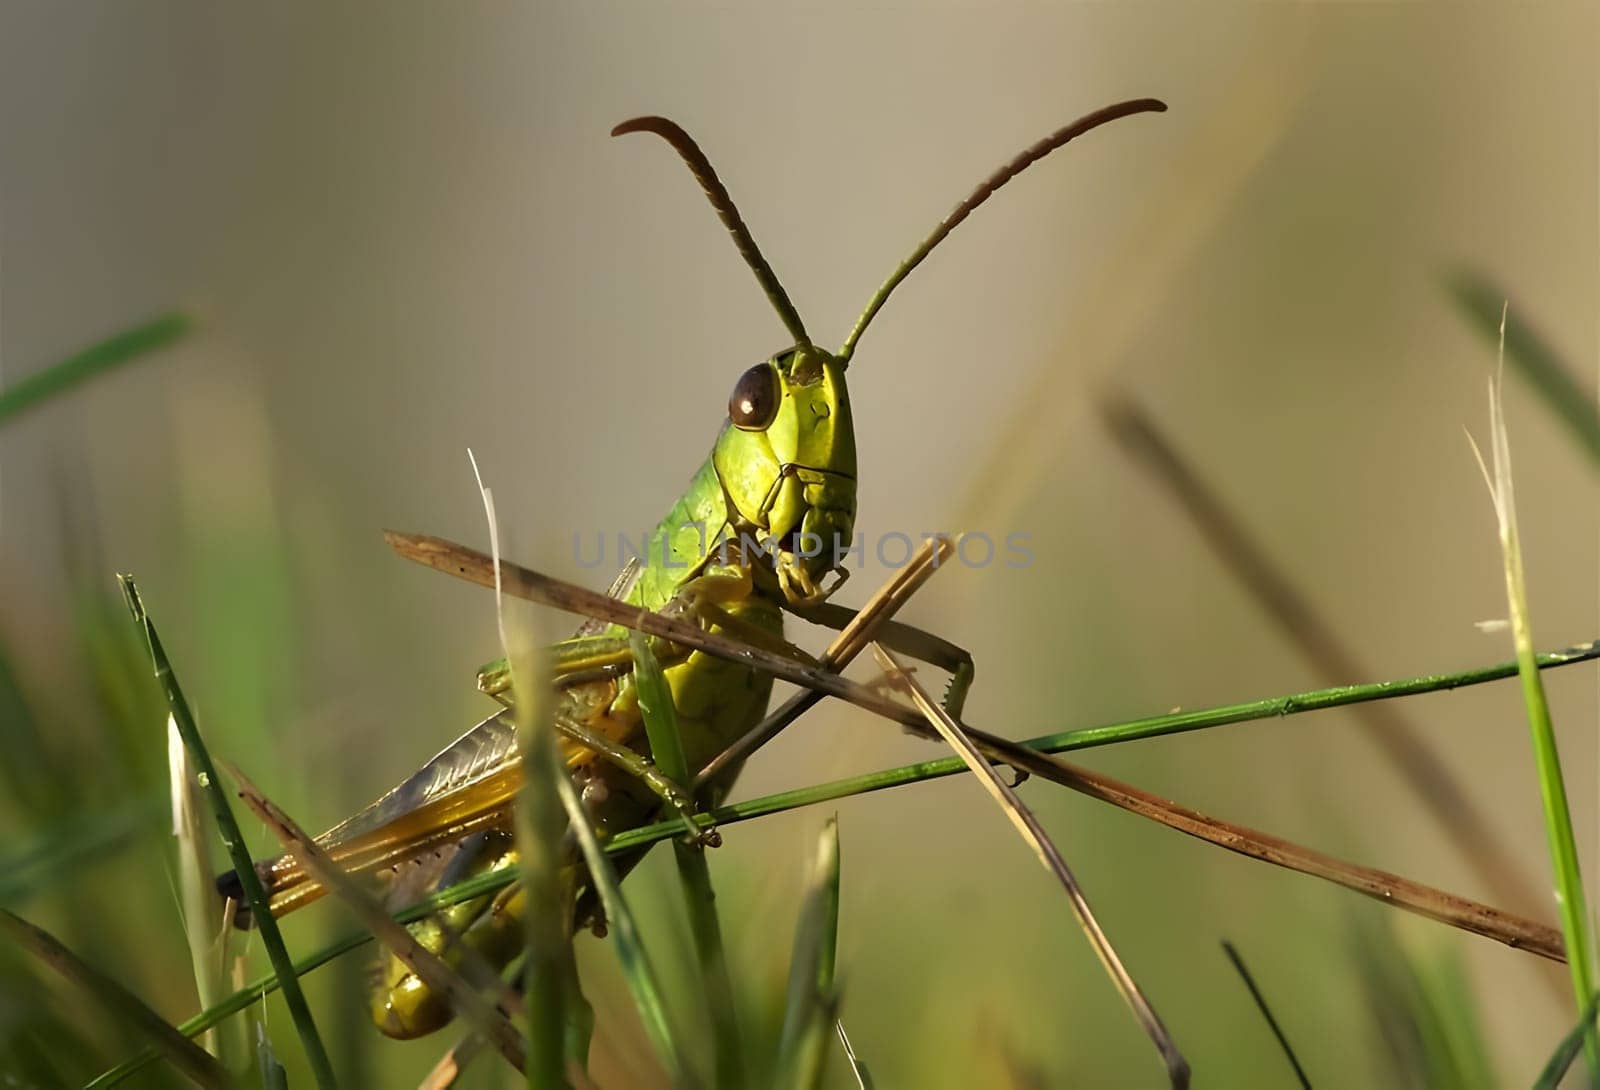 A tiny grasshopper gracefully rests on a slender blade of grass, basking in the warmth of the sun. Its vibrant green color harmonizes with the natural surroundings.